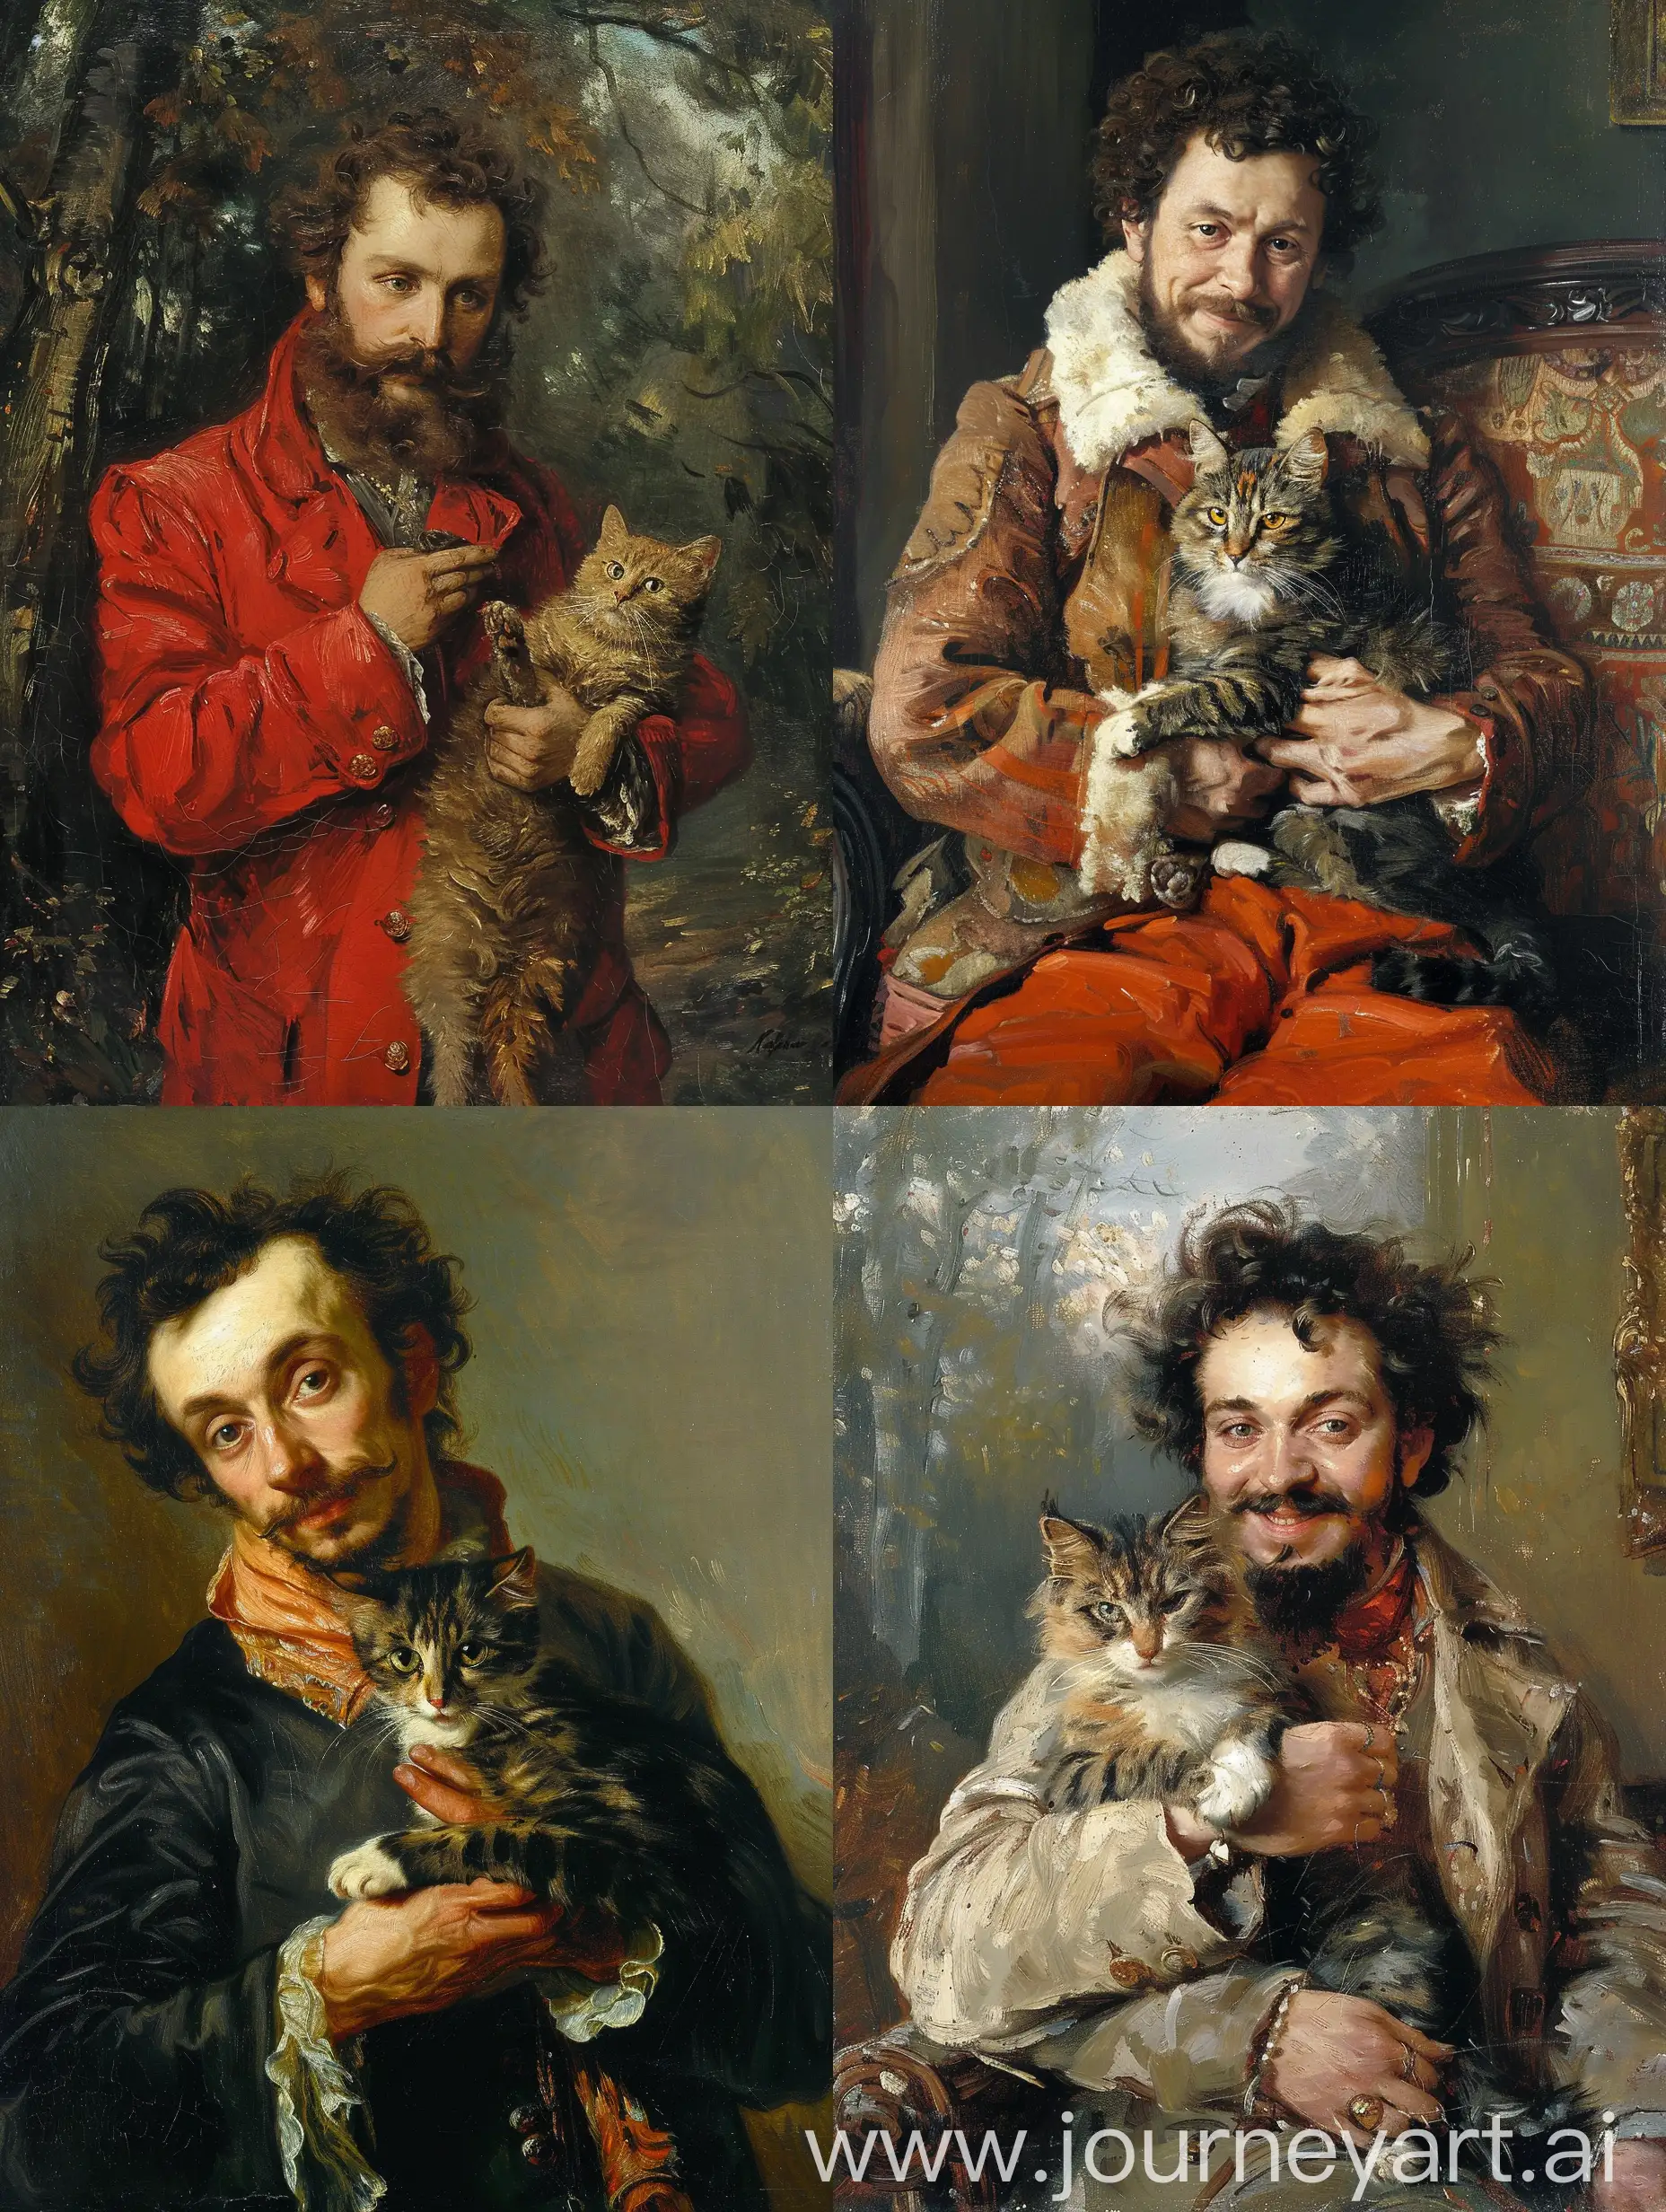 Russian-Poet-Pushkin-Poses-with-a-Cat